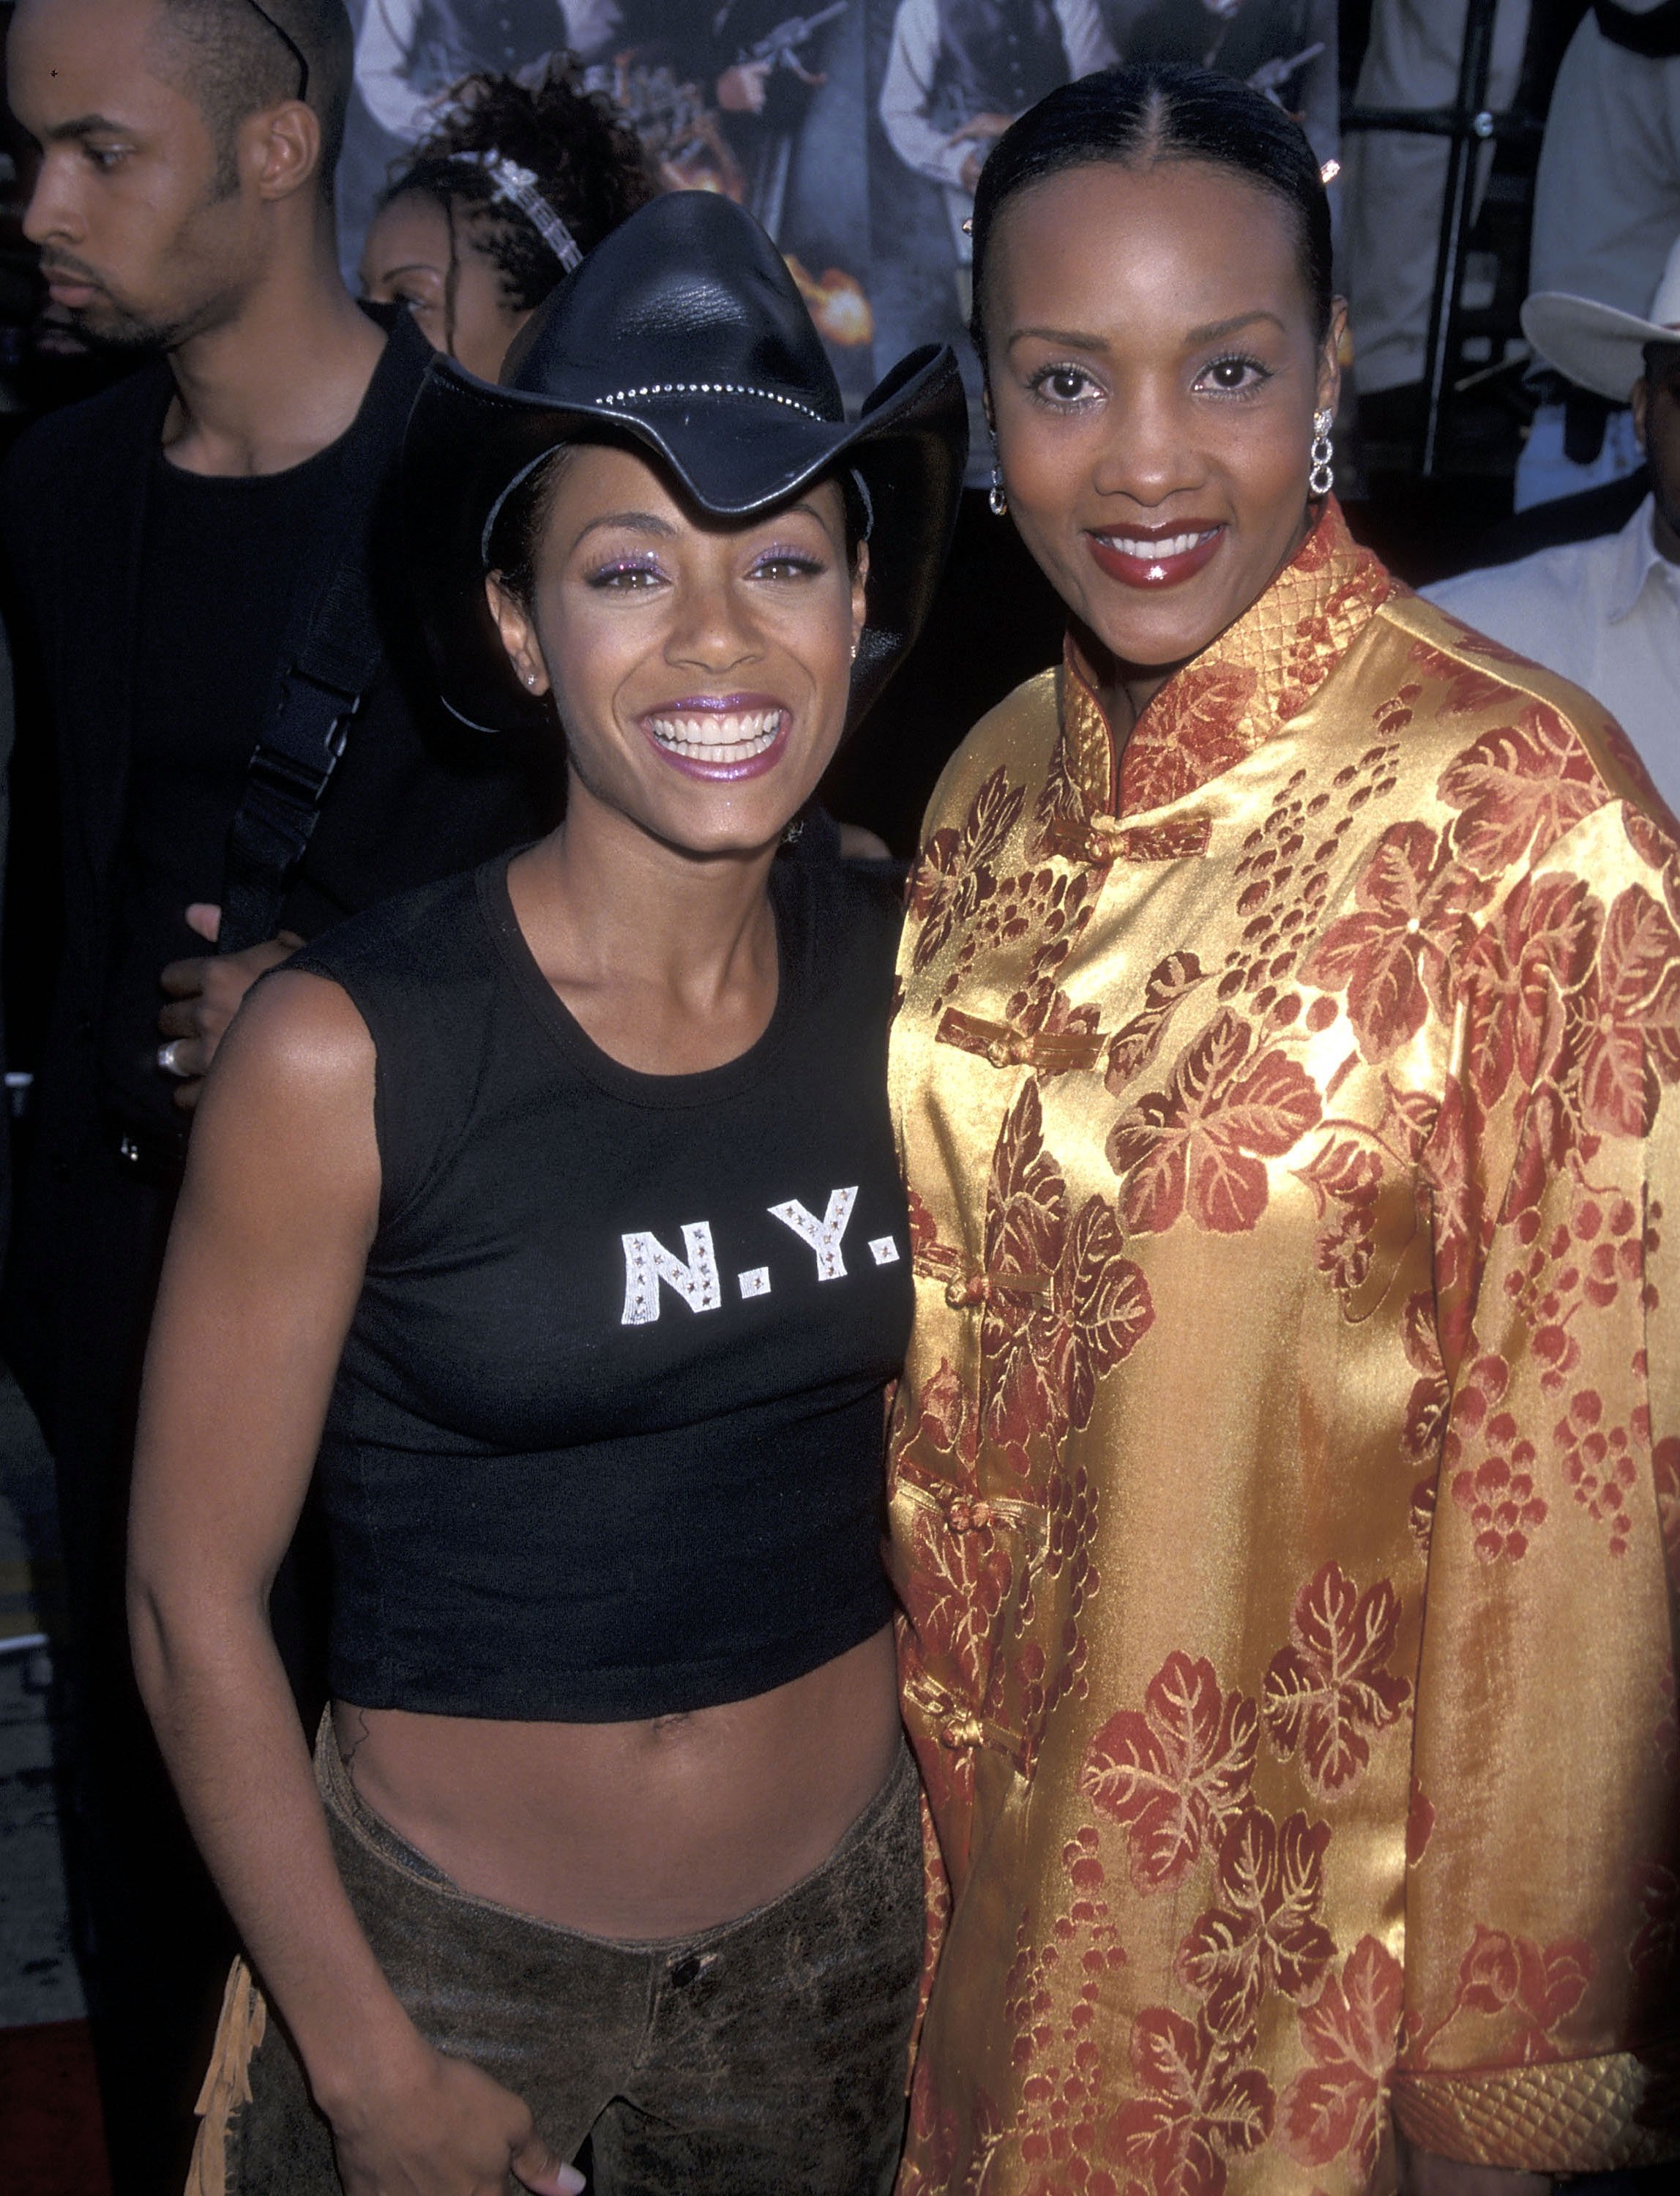 Actress Jada Pinkett Smith and actress Vivica A. Fox attend the 'Wild Wild West' Westwood Premiere on June 28, 1999 at Mann Village Theatre in Westwood, California. 